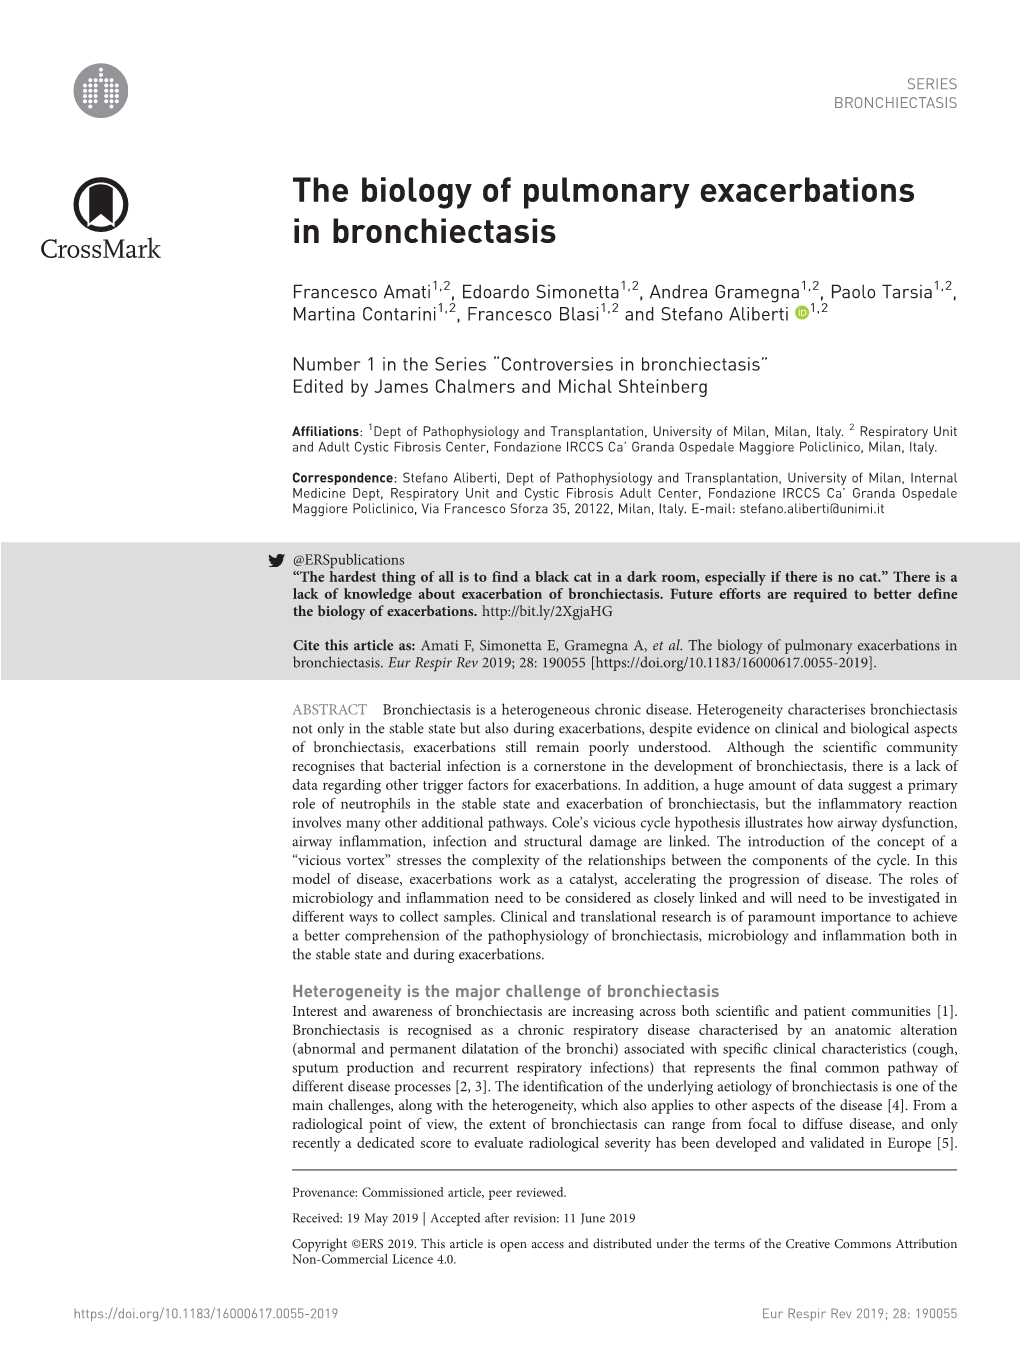 The Biology of Pulmonary Exacerbations in Bronchiectasis